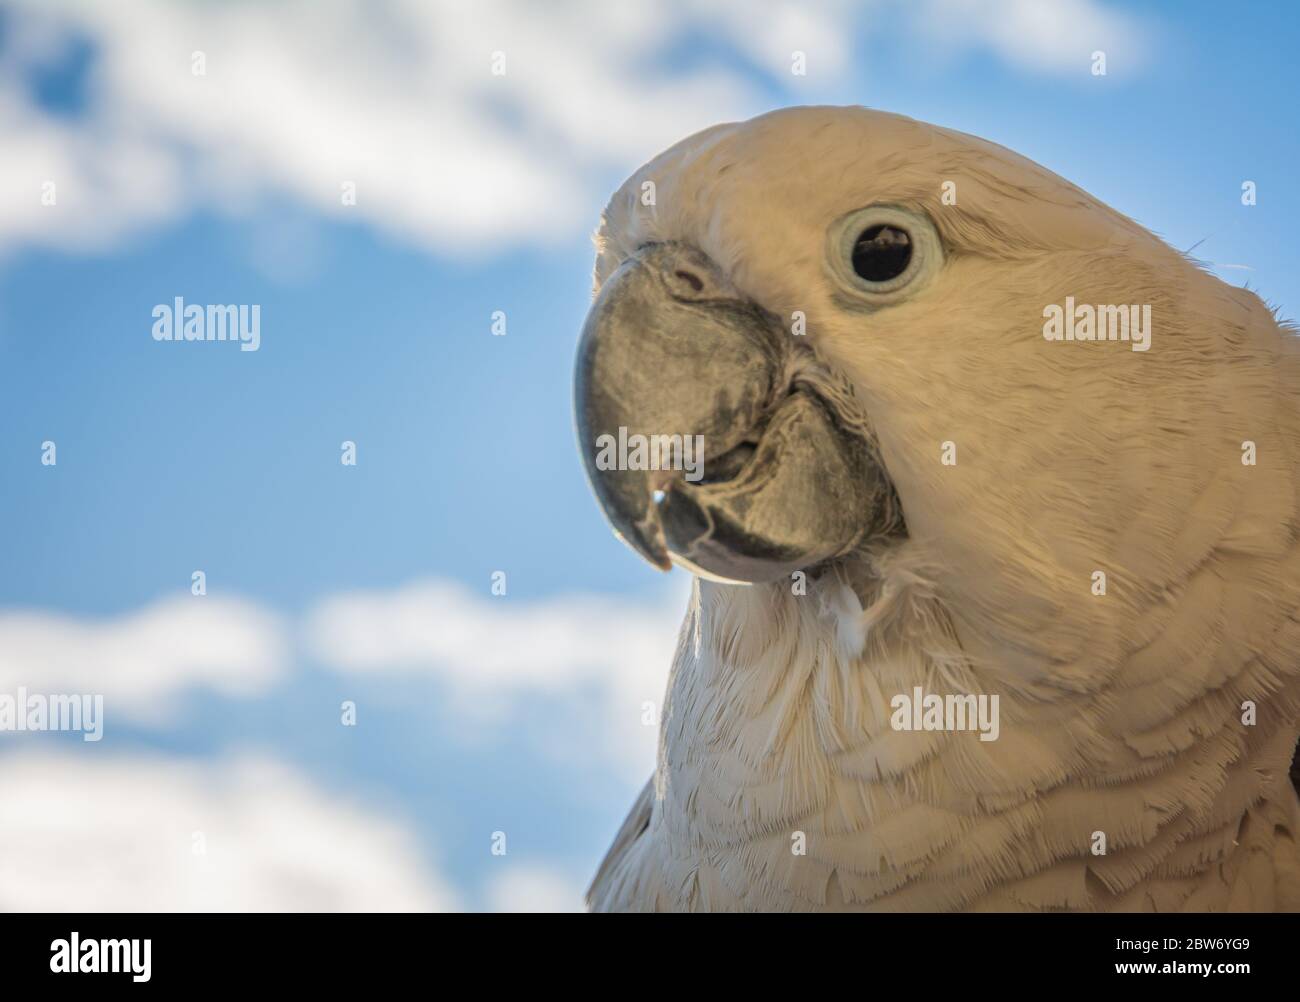 Portrait of a Sulfur-Crested Cockatoo (Cacatua galerita) with blue sky background, front, close-up. Stock Photo